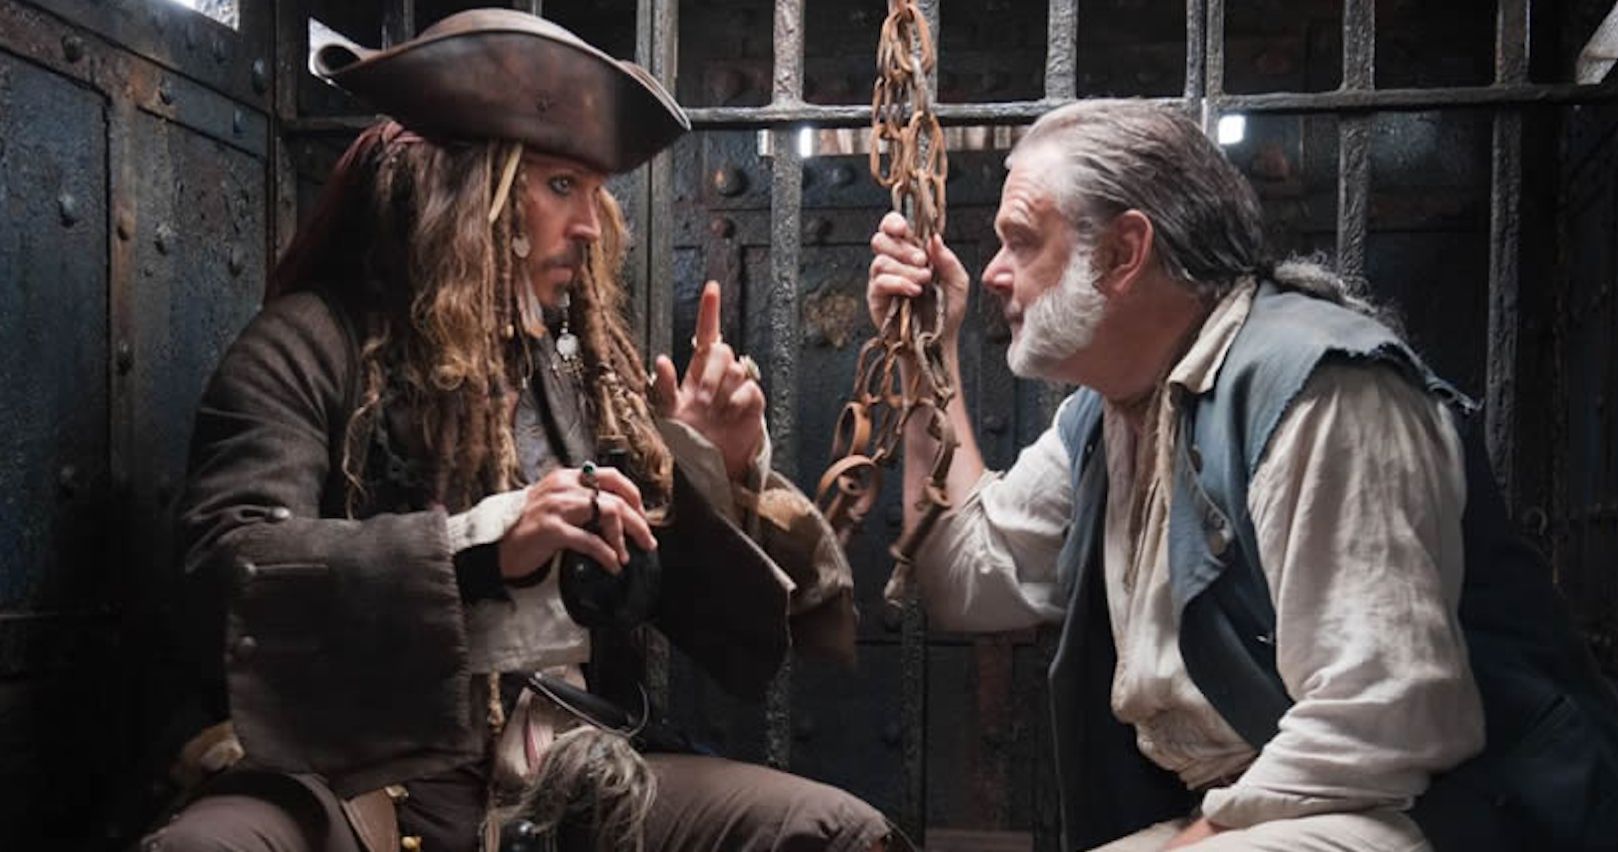 Pirates of the Caribbean Co-Star Believes Johnny Depp's Jack Sparrow Should Return